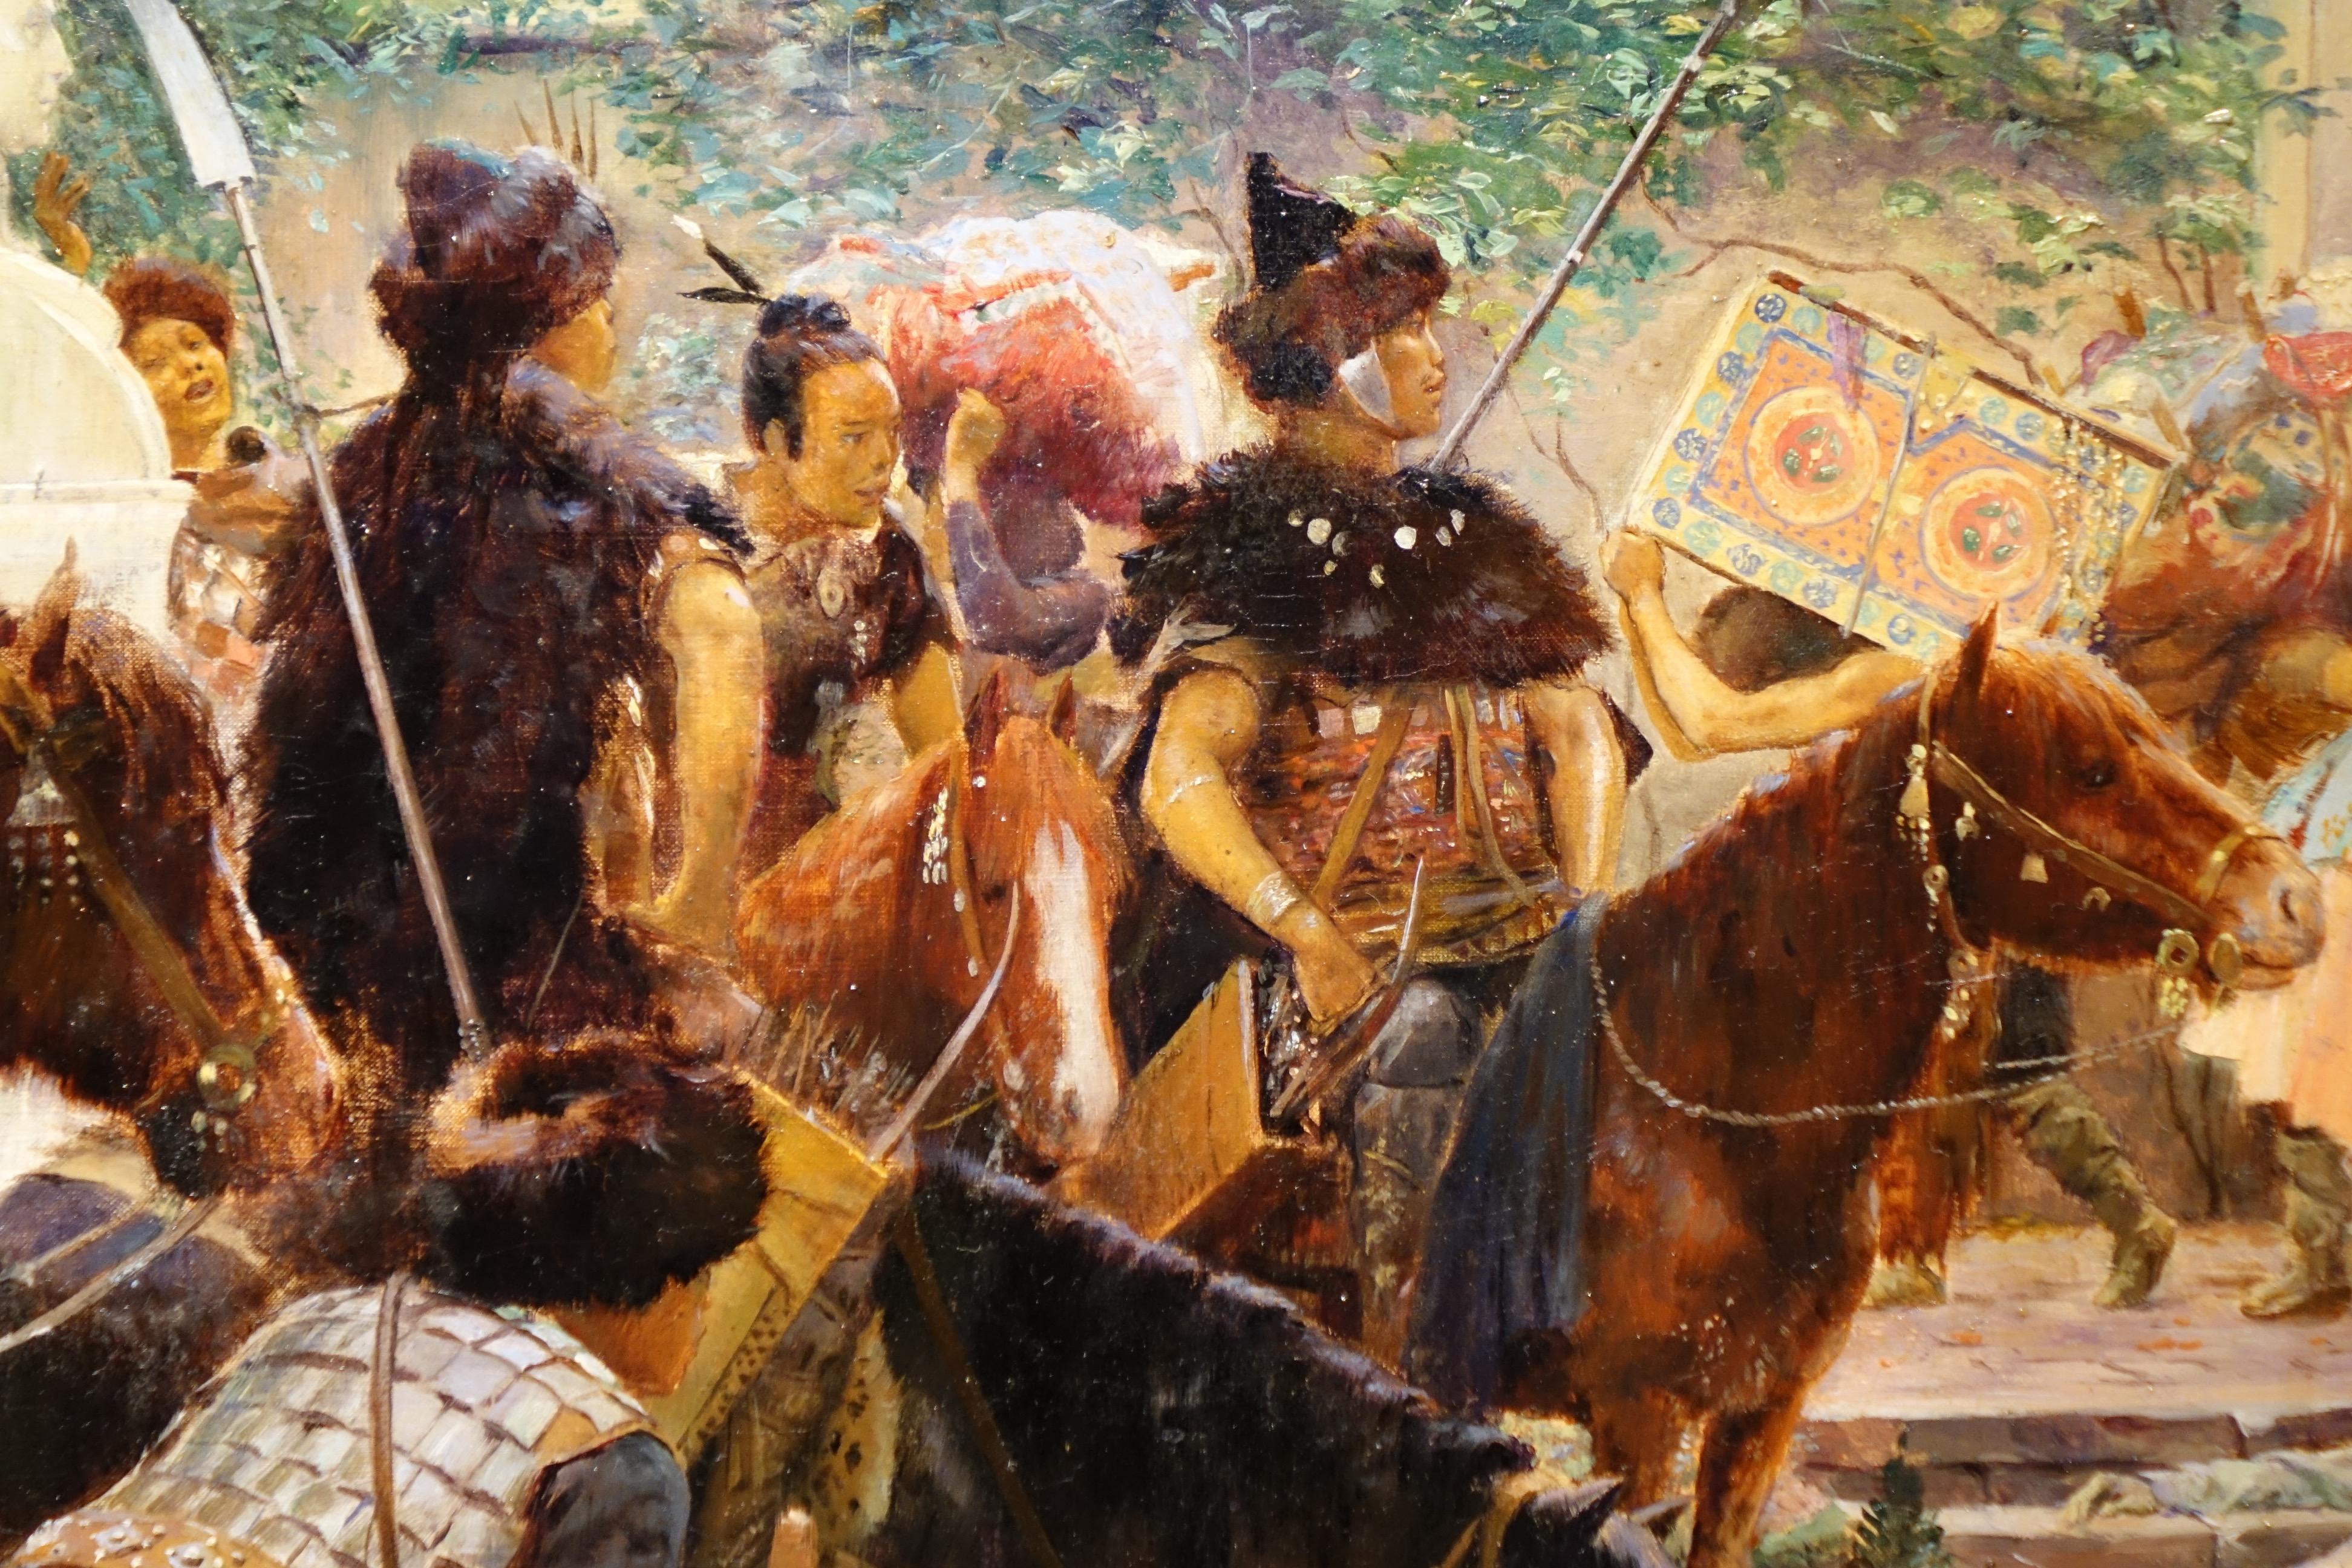 Looting of a Gallo-Roman villa by Huns horsemen. Oil on canvas, signed G.Rochegrosse, dated 1894.
Georges Antoine Rochegrosse (1859-1938), from an intellectual and artistic background, was a brilliant student of the Académie Julian, and afterwards